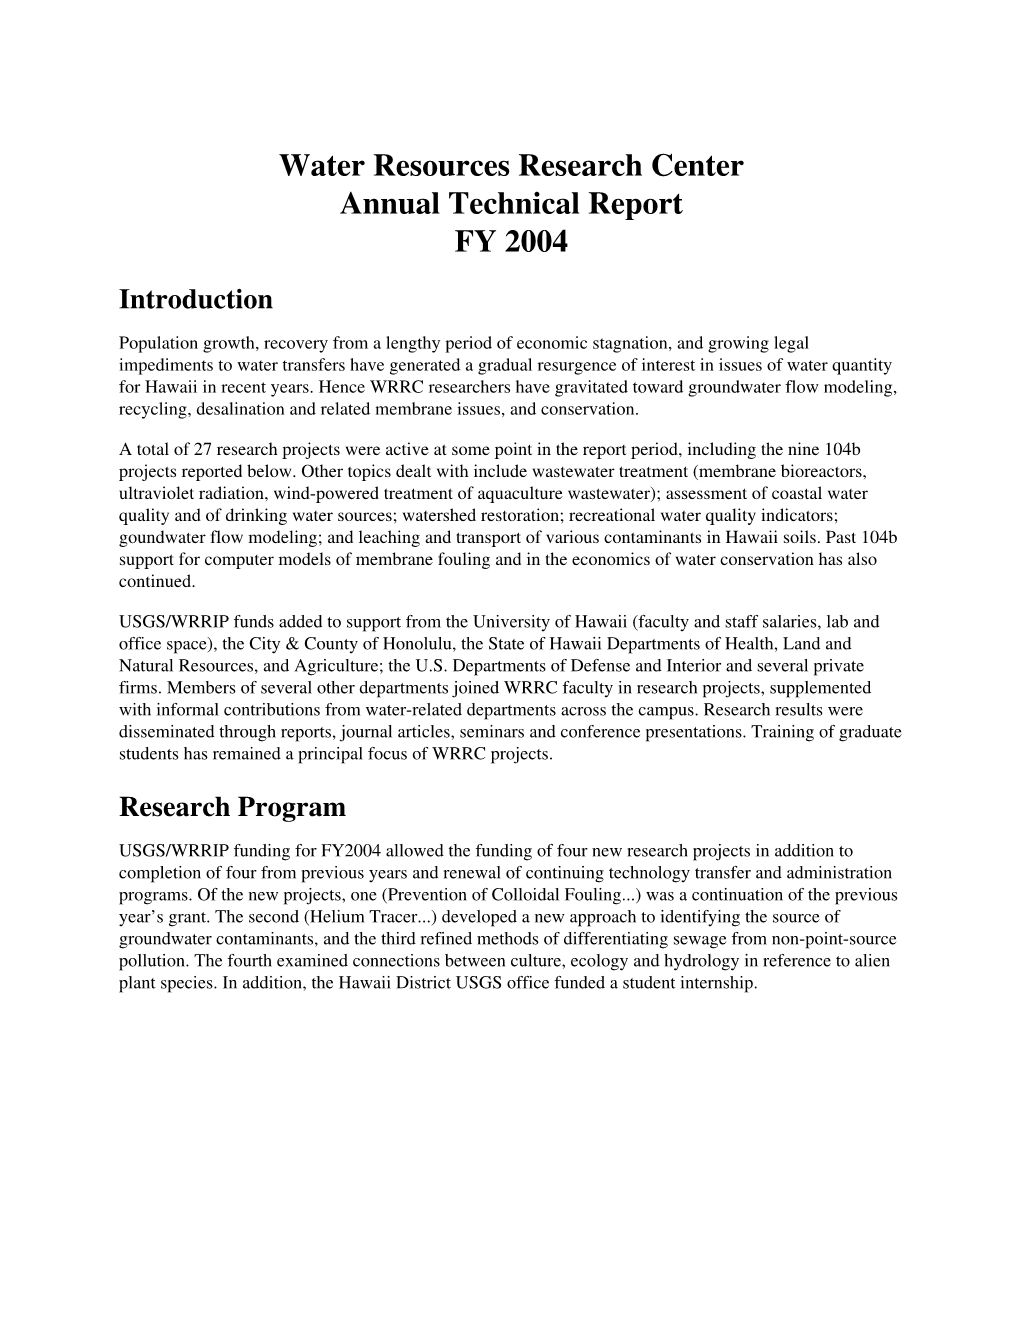 Water Resources Research Center Annual Technical Report FY 2004